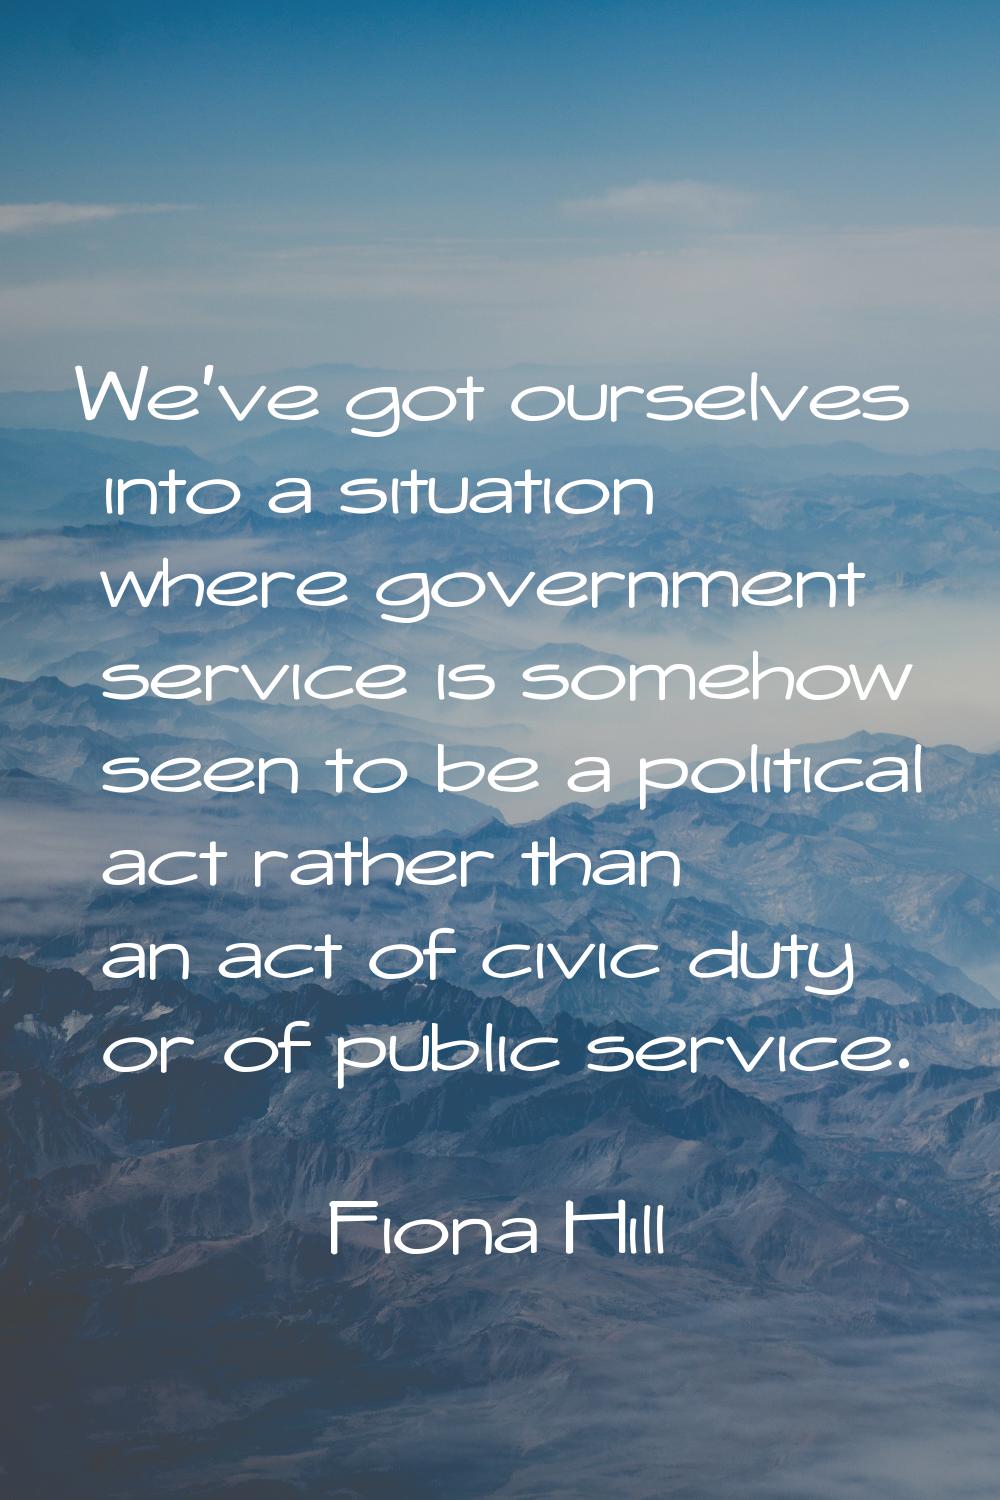 We've got ourselves into a situation where government service is somehow seen to be a political act